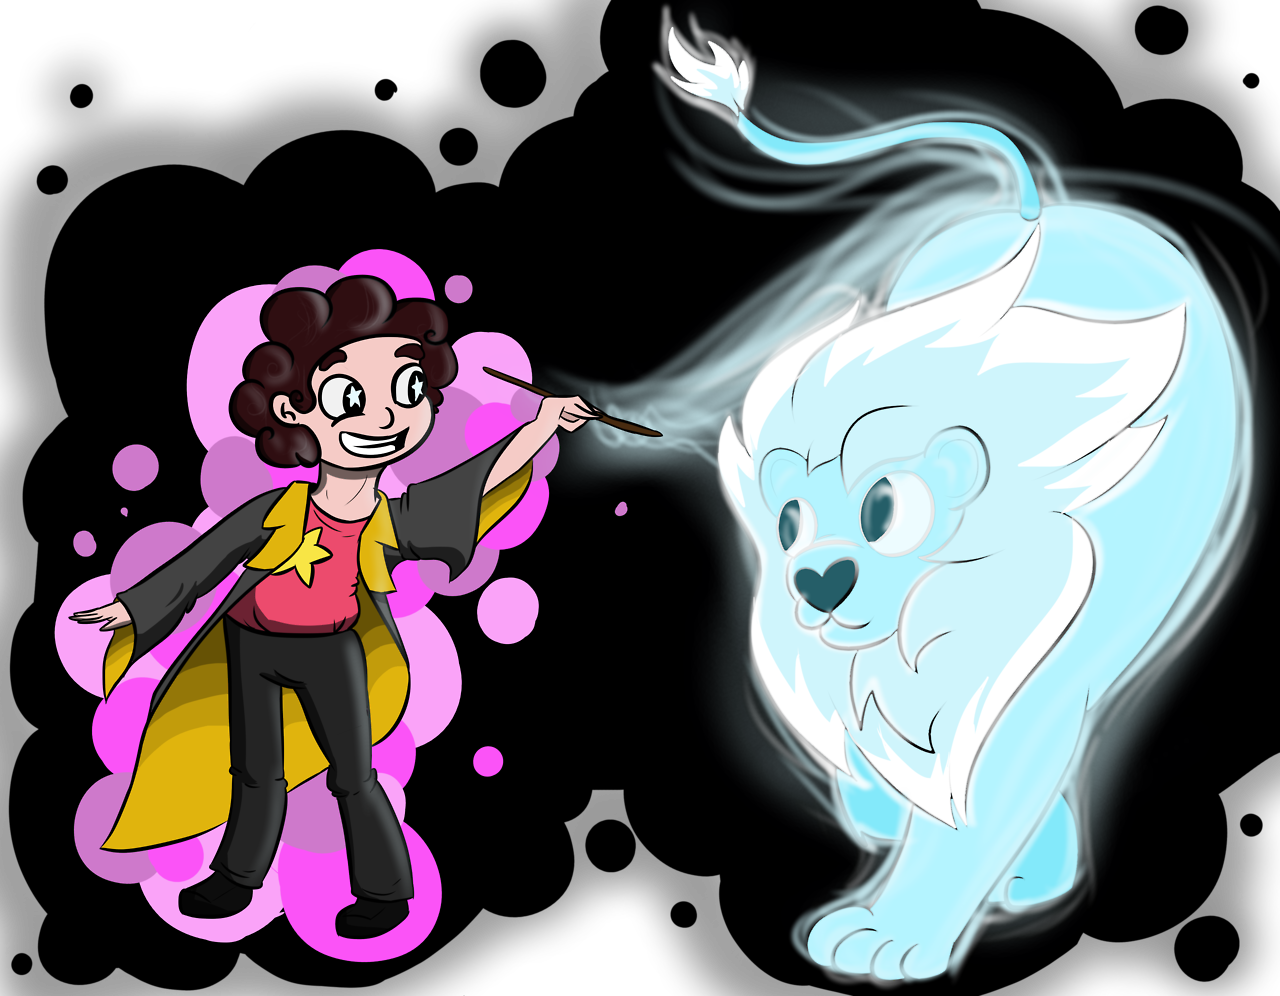 @thatsthat24‘s inktober day 8 You know steven’s patronus would be Lion